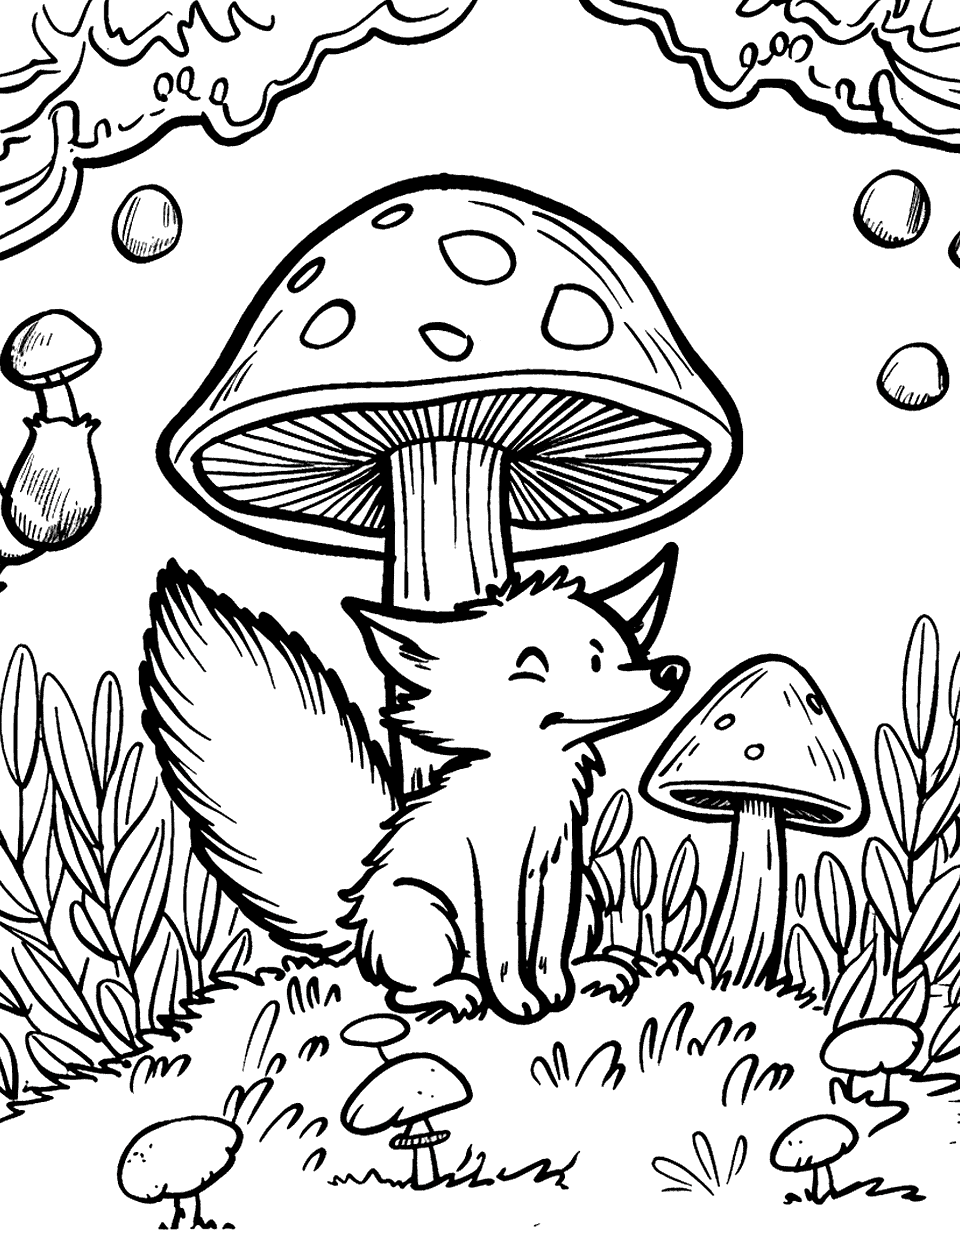 Baby Fox Near Mushroom Patch Coloring Page - A baby fox in the midst of a patch of mushrooms in the forest.